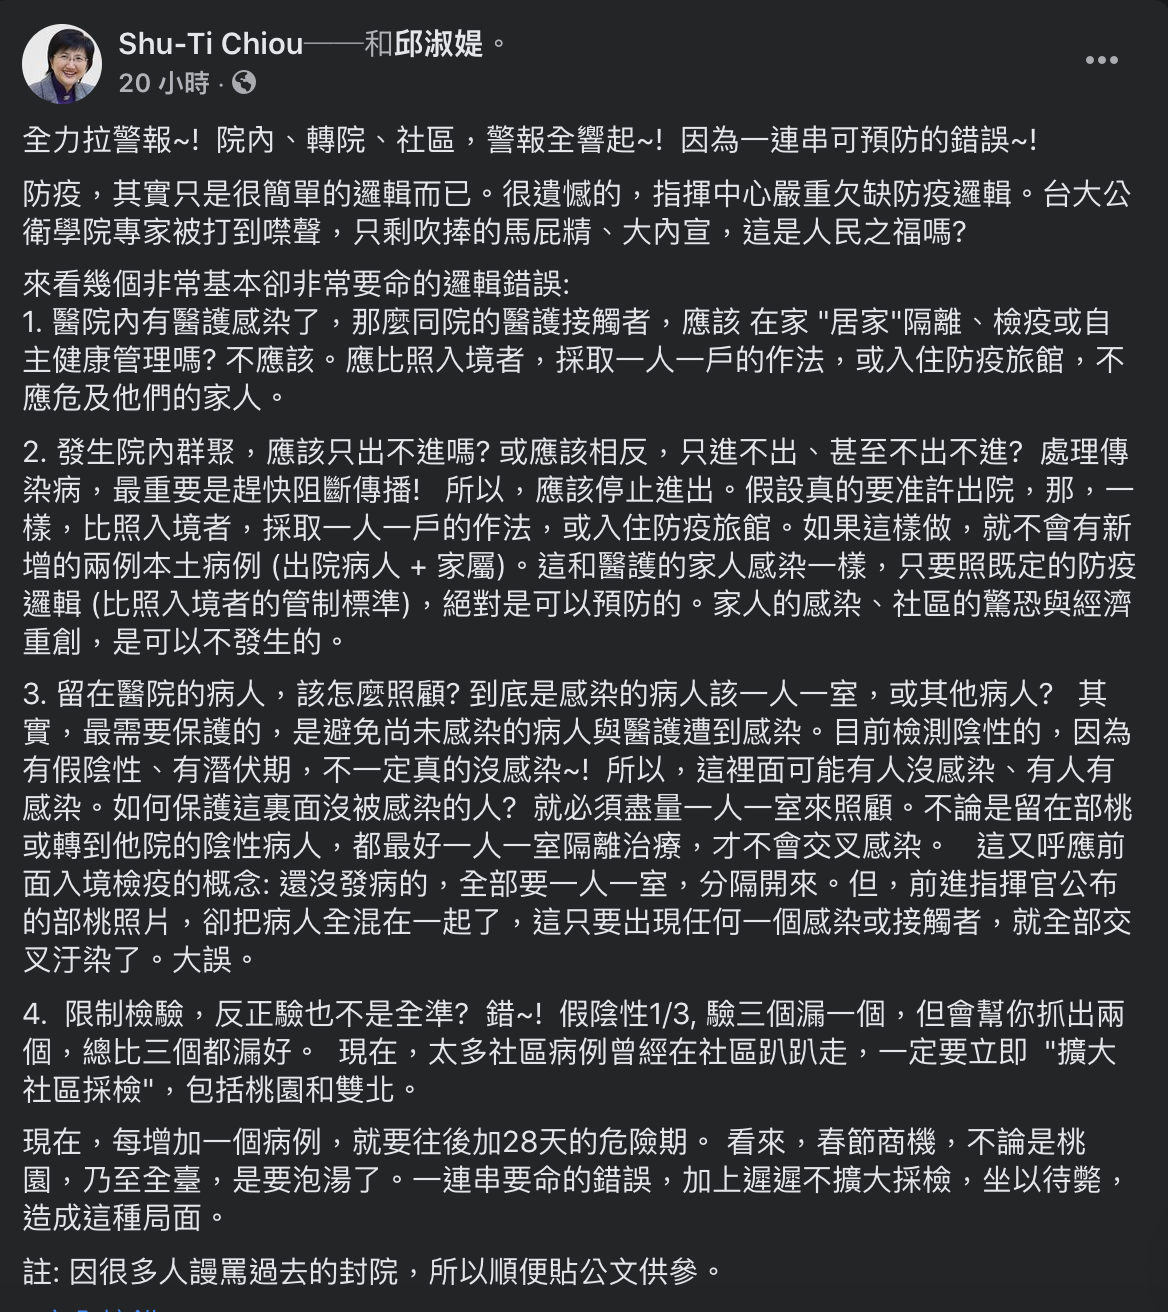 Full text of Qiu Shuti's Facebook page Image: Retrieved from Qiu Shuti's Facebook